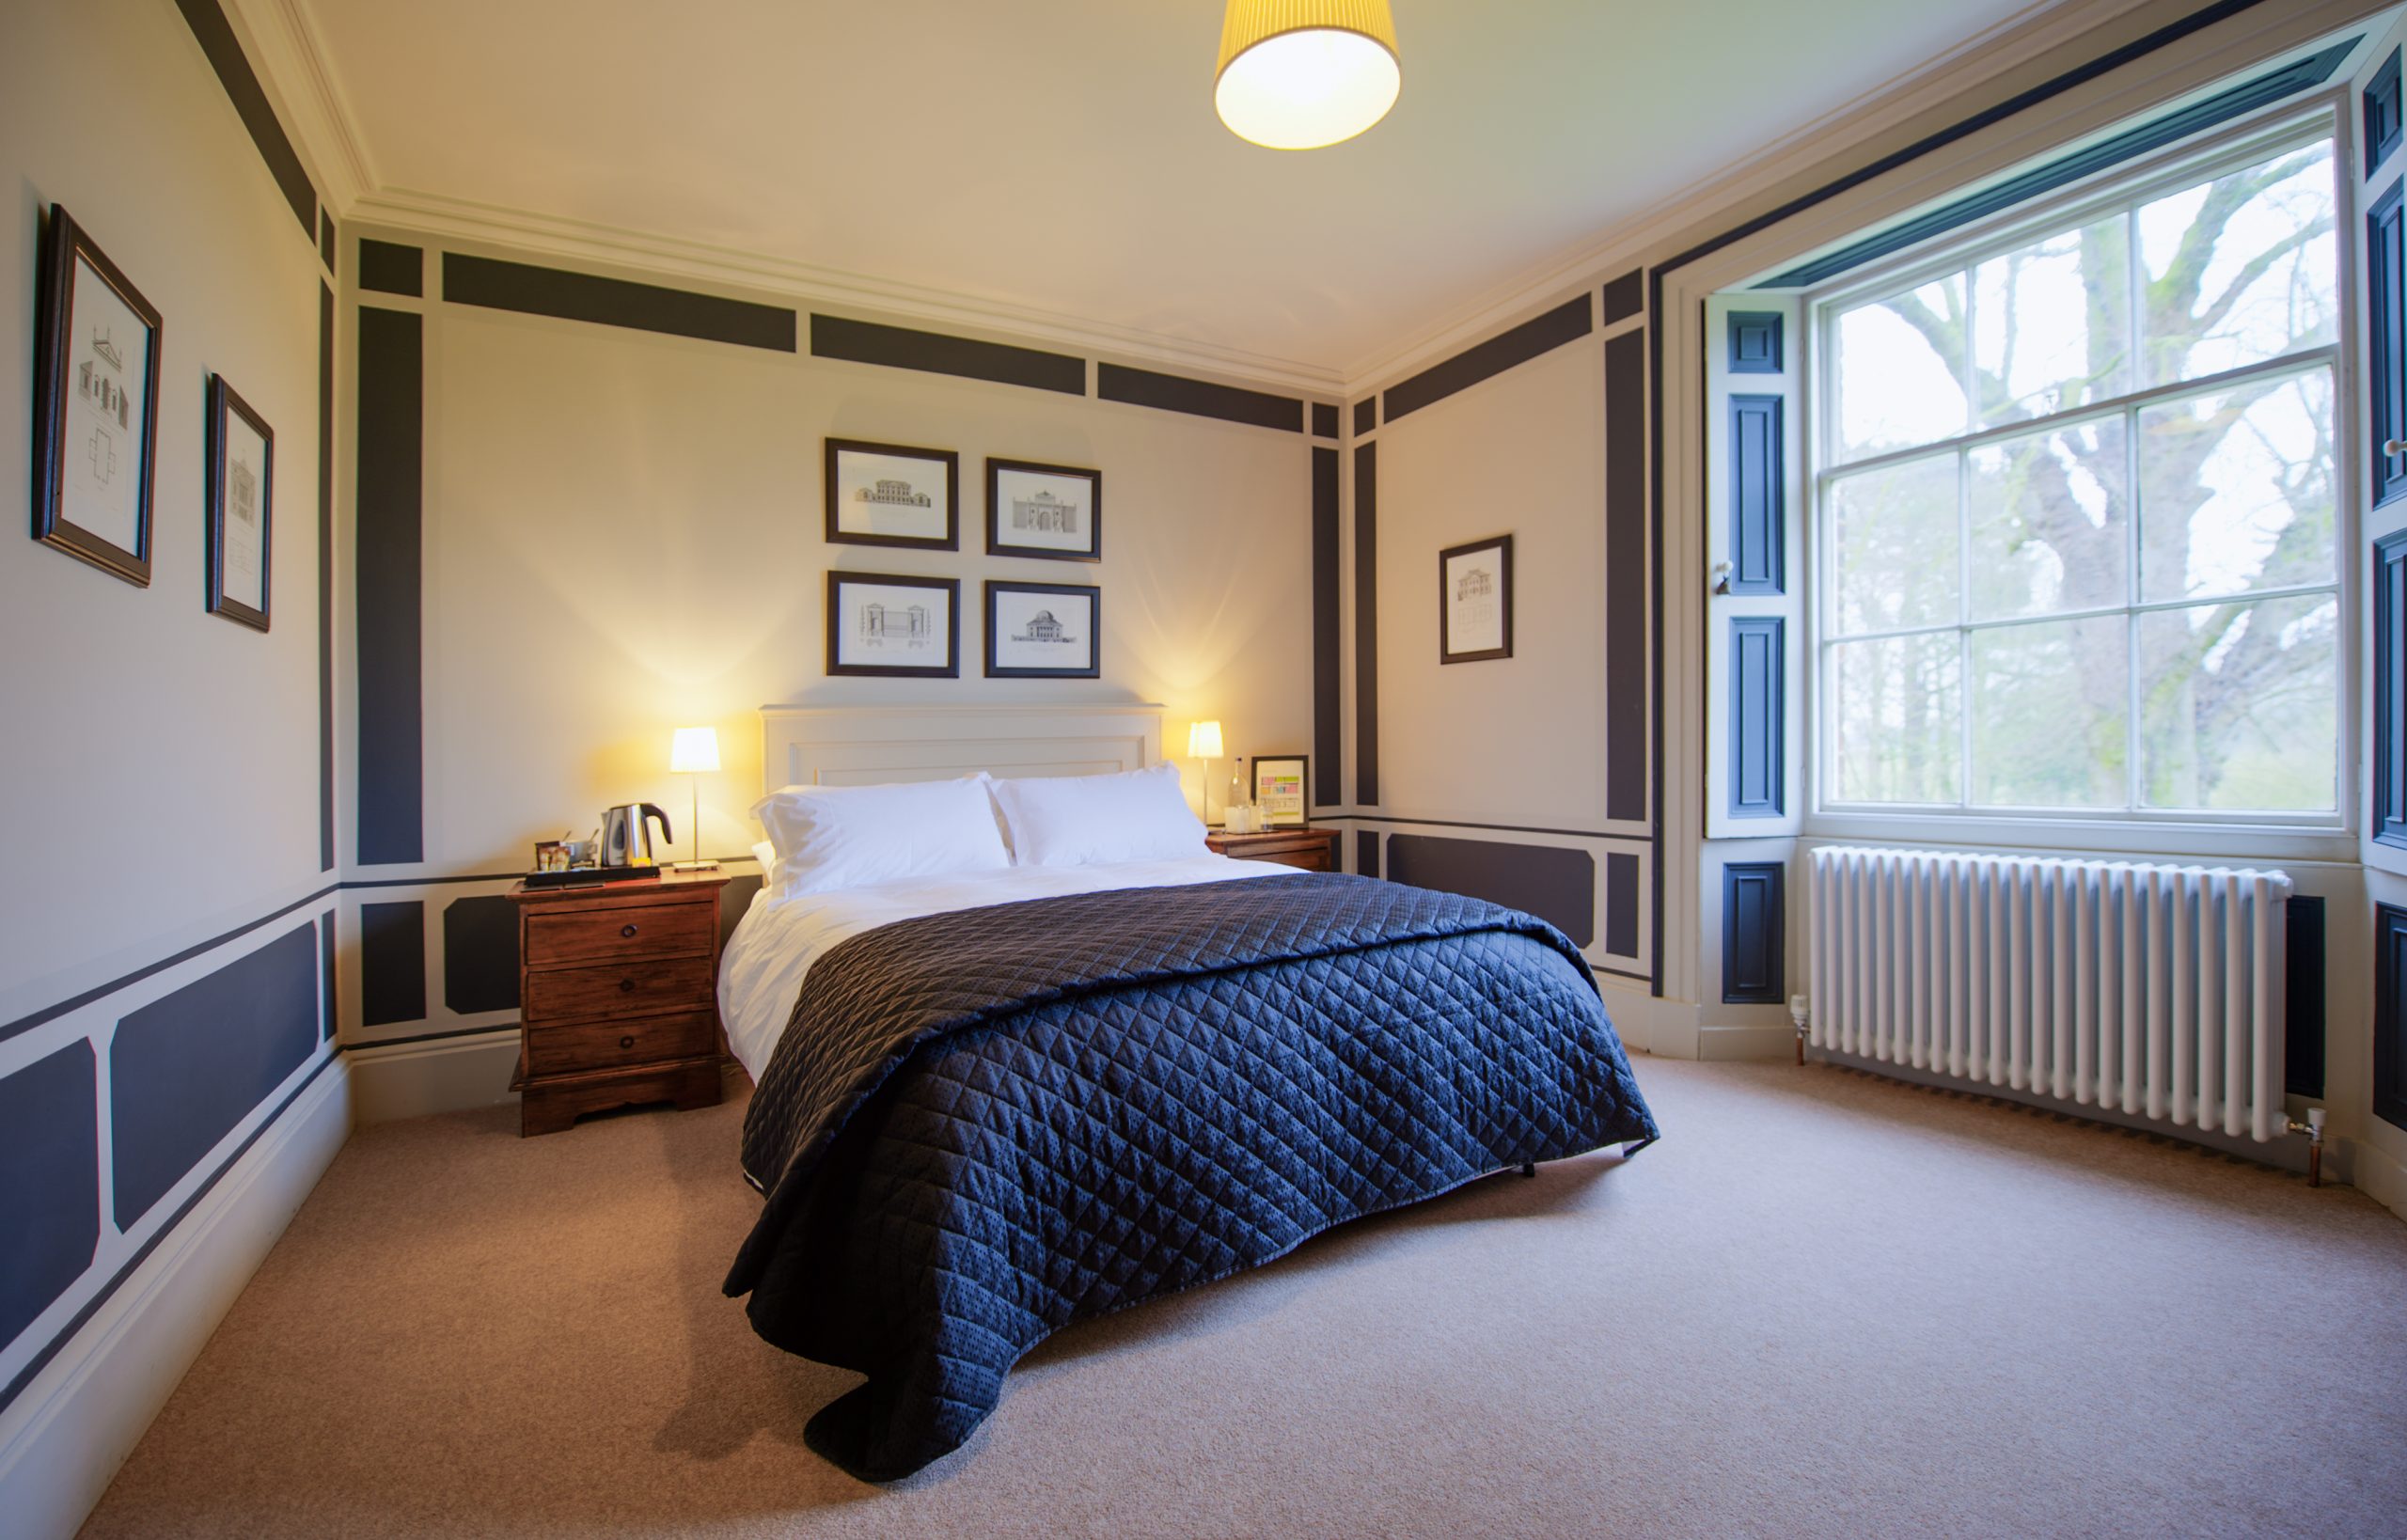 Rise Hall Easy Yorkshire - Accommodation - Luxury Bedrooms